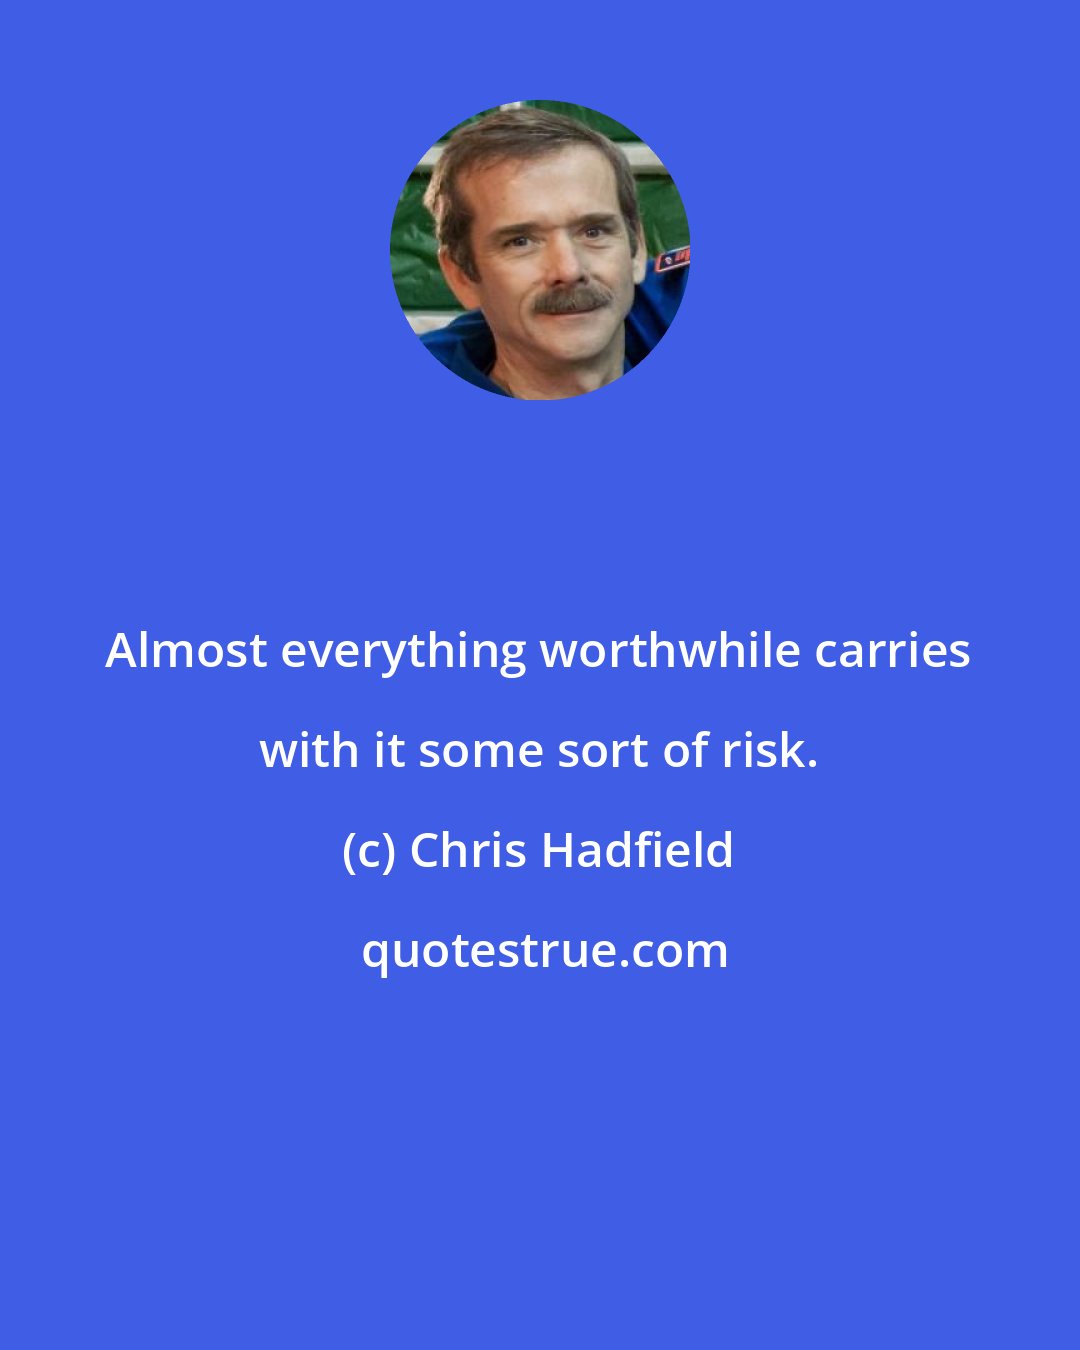 Chris Hadfield: Almost everything worthwhile carries with it some sort of risk.